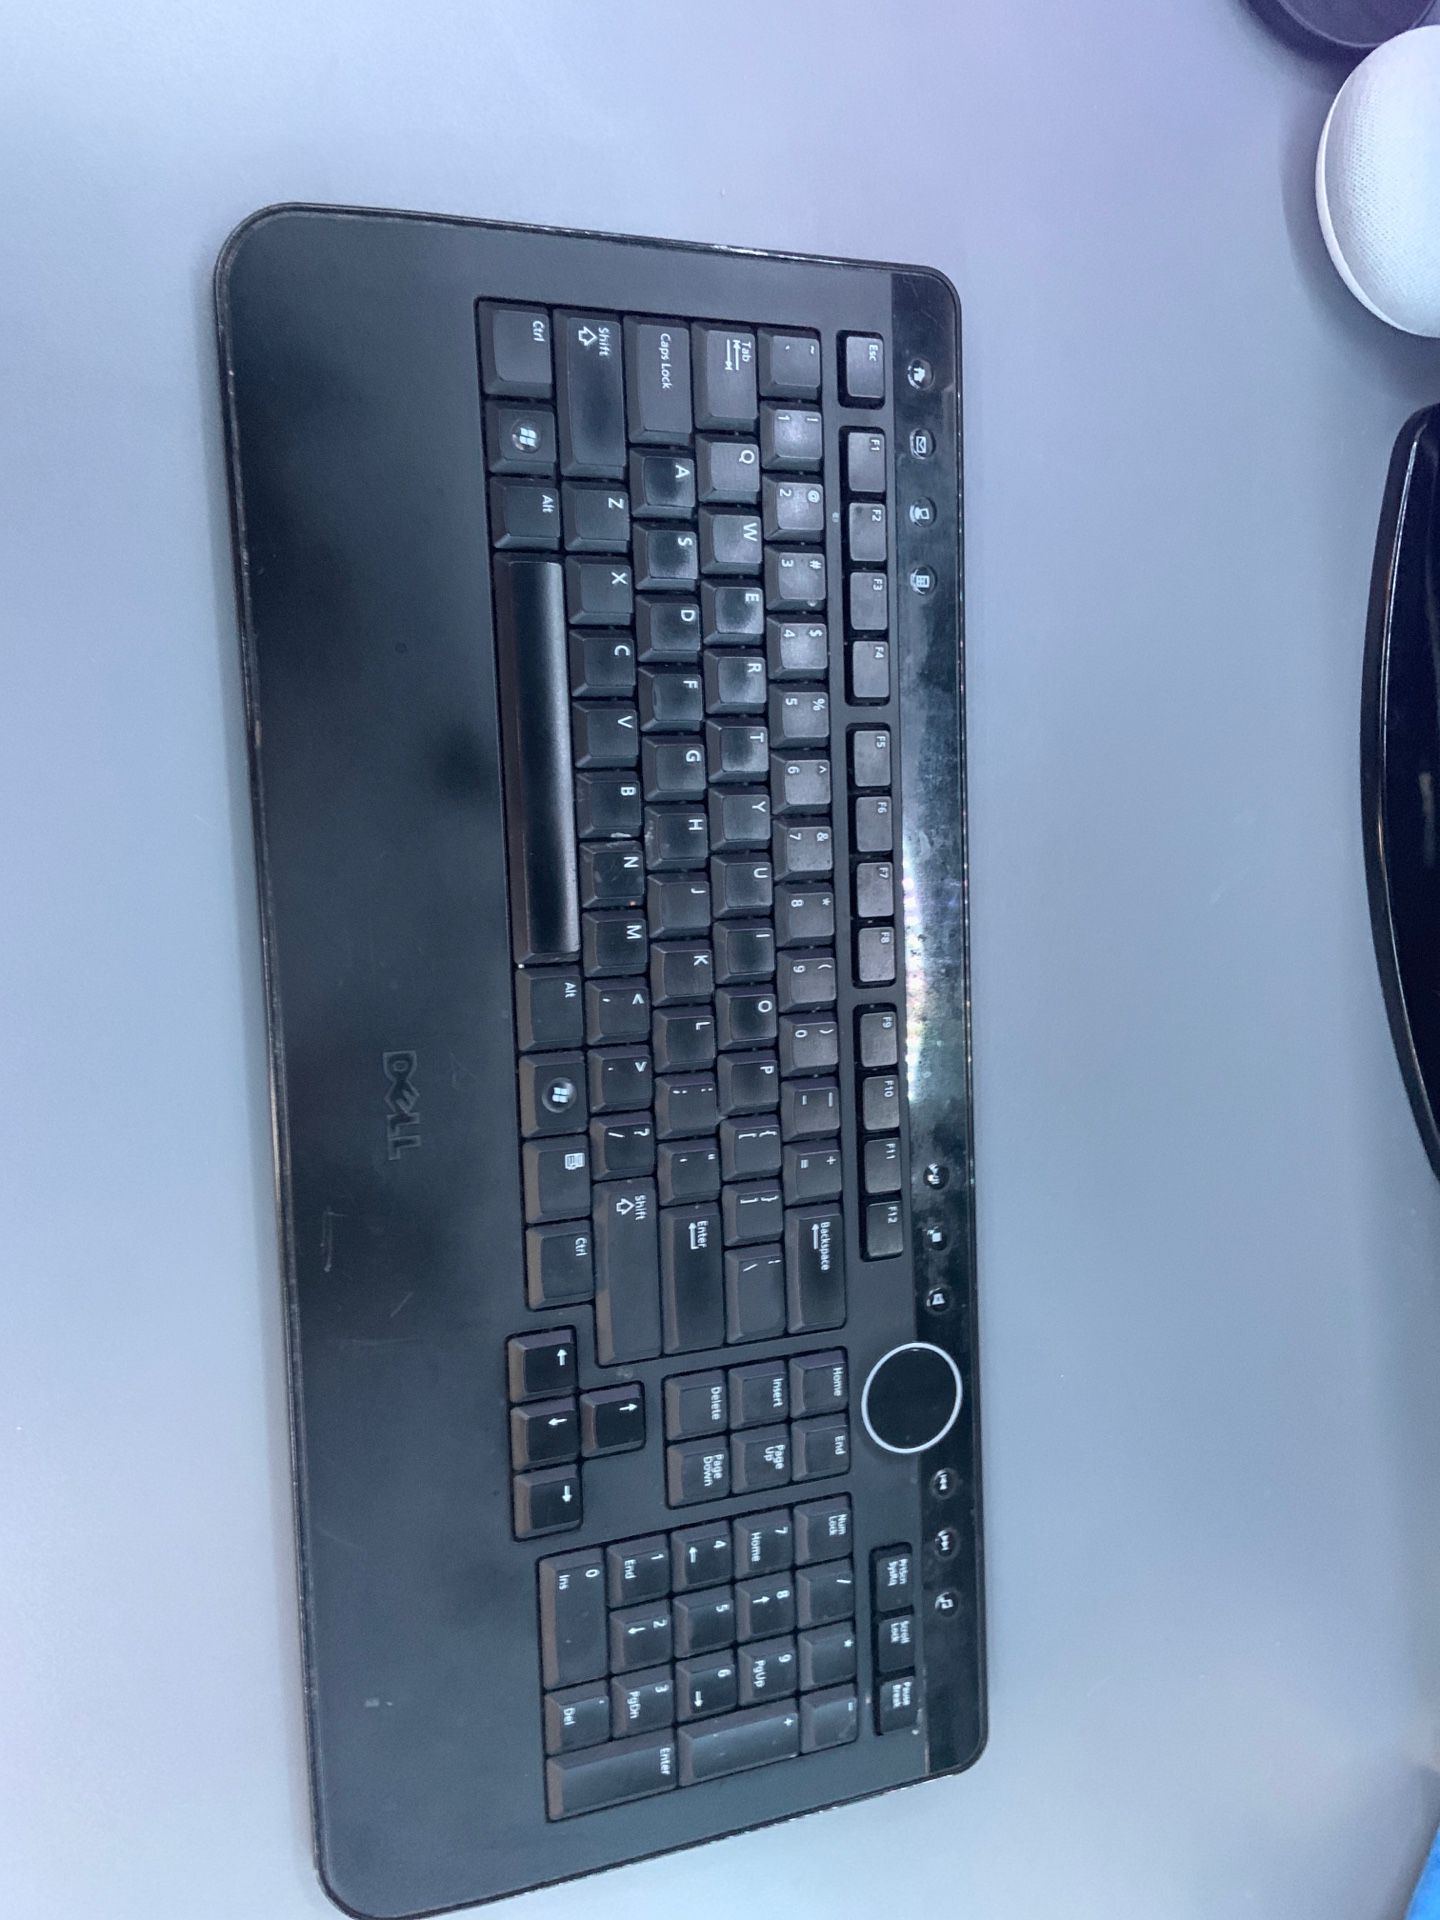 Wireless dell keyboard and mouse